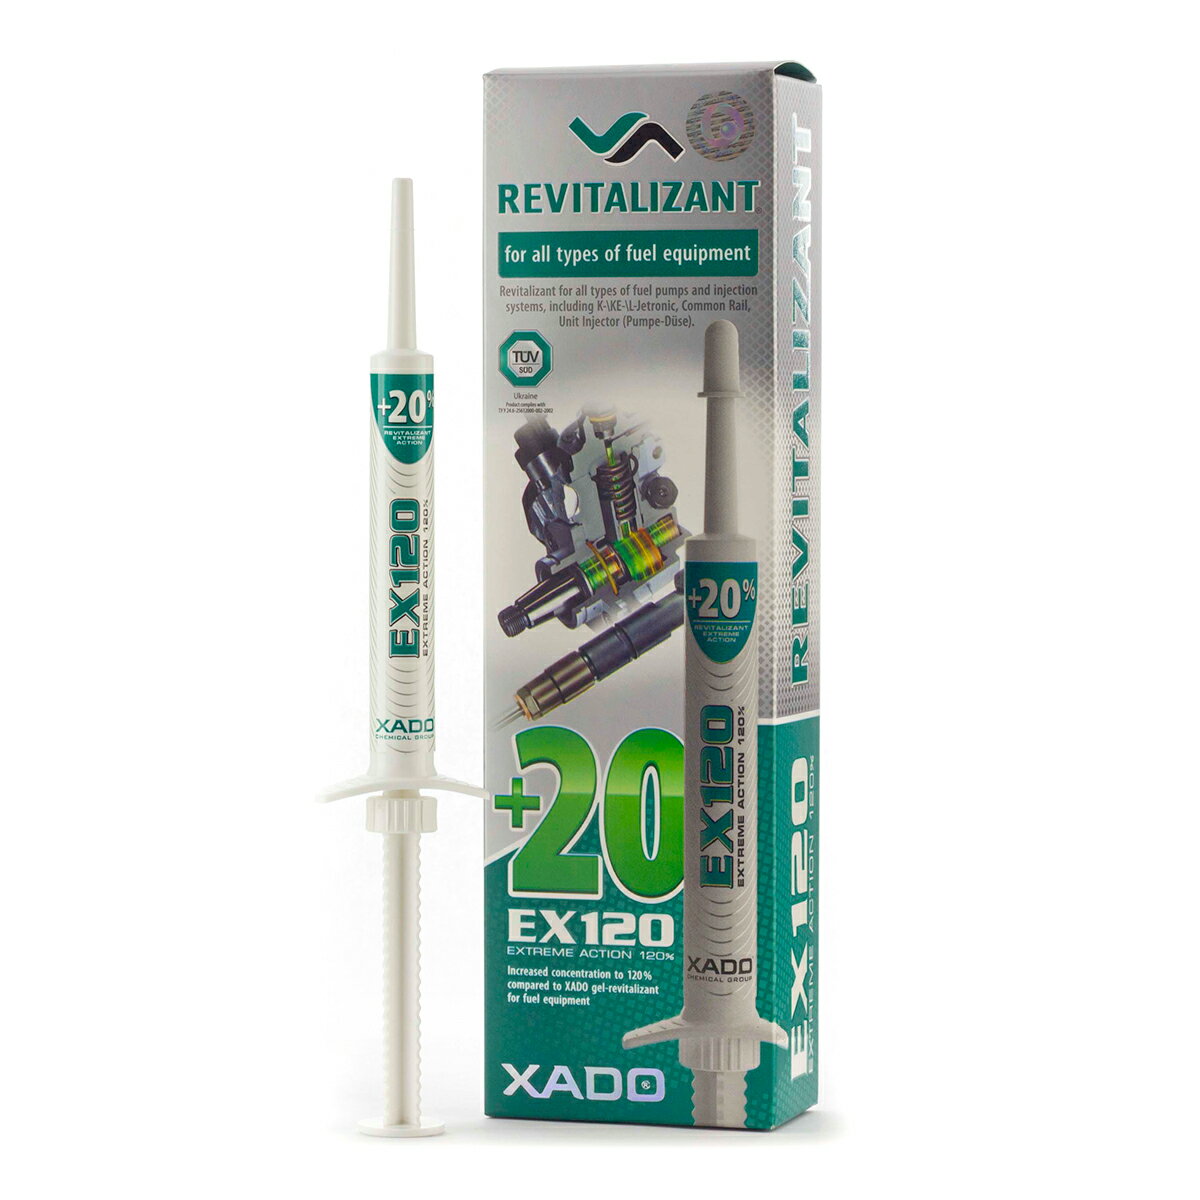 XADOREVITALIZANT EX120 for all types of fuel equipment and fuel injection systems燃料システム用保護添加剤(ガソリン、軽油、他ディーゼル燃料用)